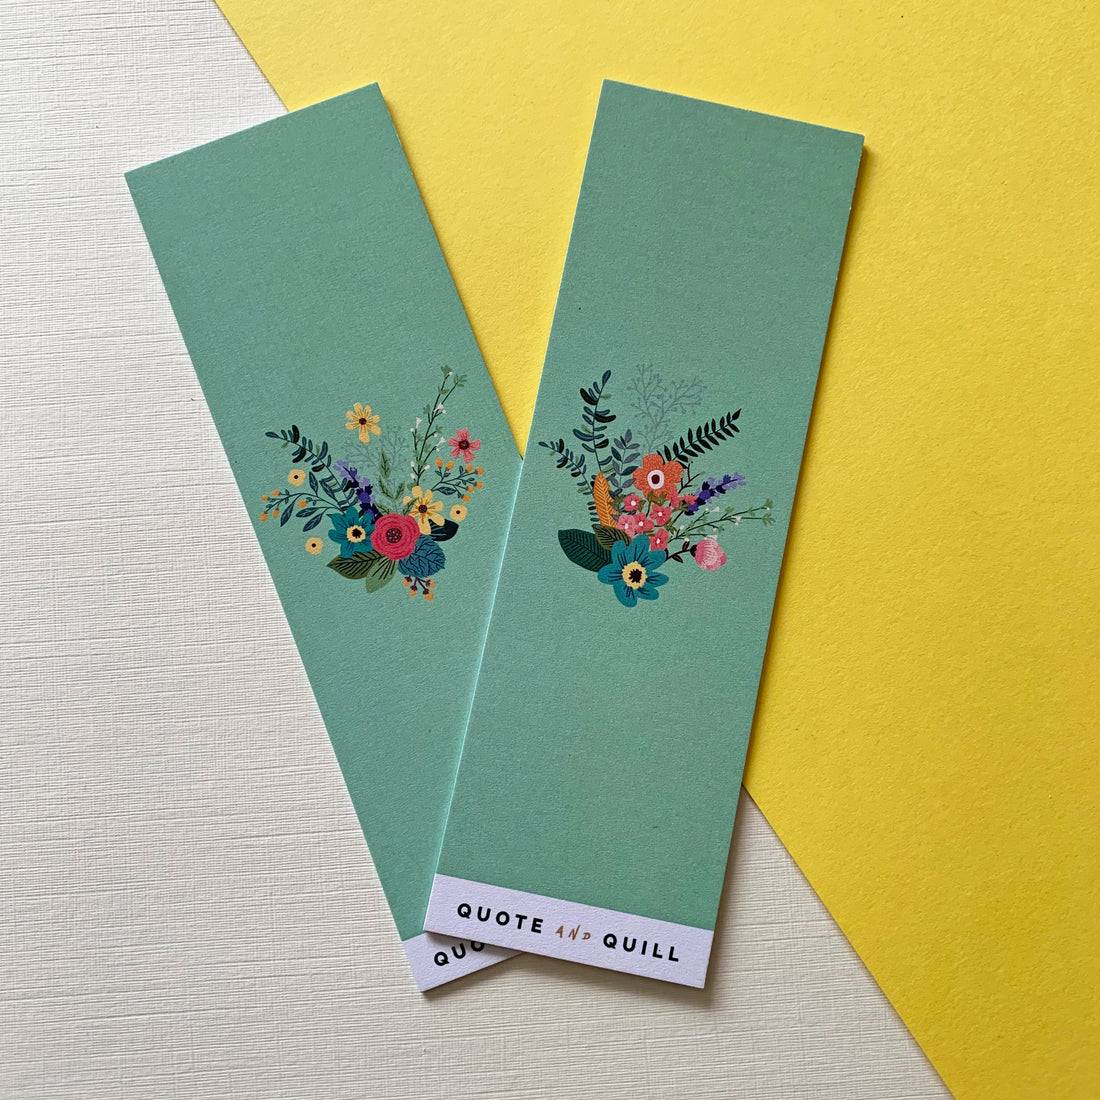 Kindred Spirits / Anne With An E Bookmarks